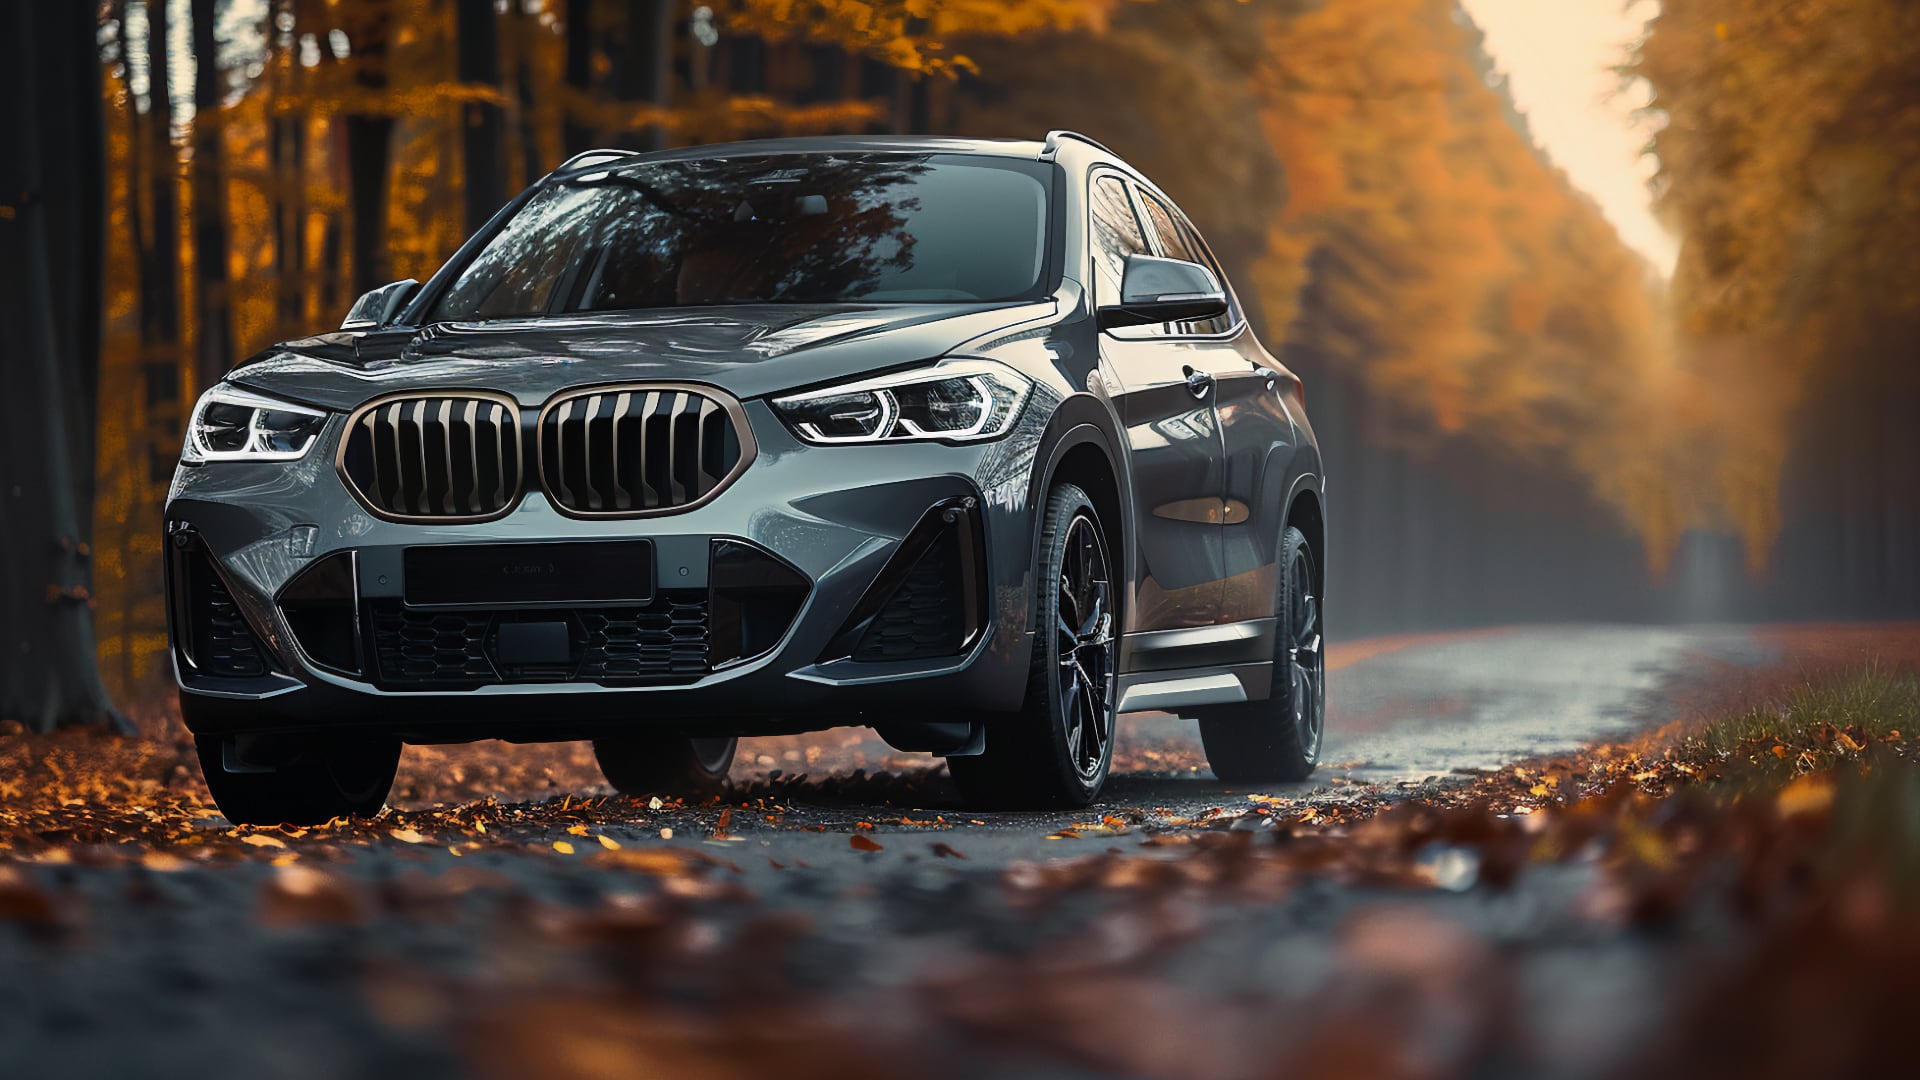 The 2019 BMW X1, one to avoid, is driving down the road in the fall.